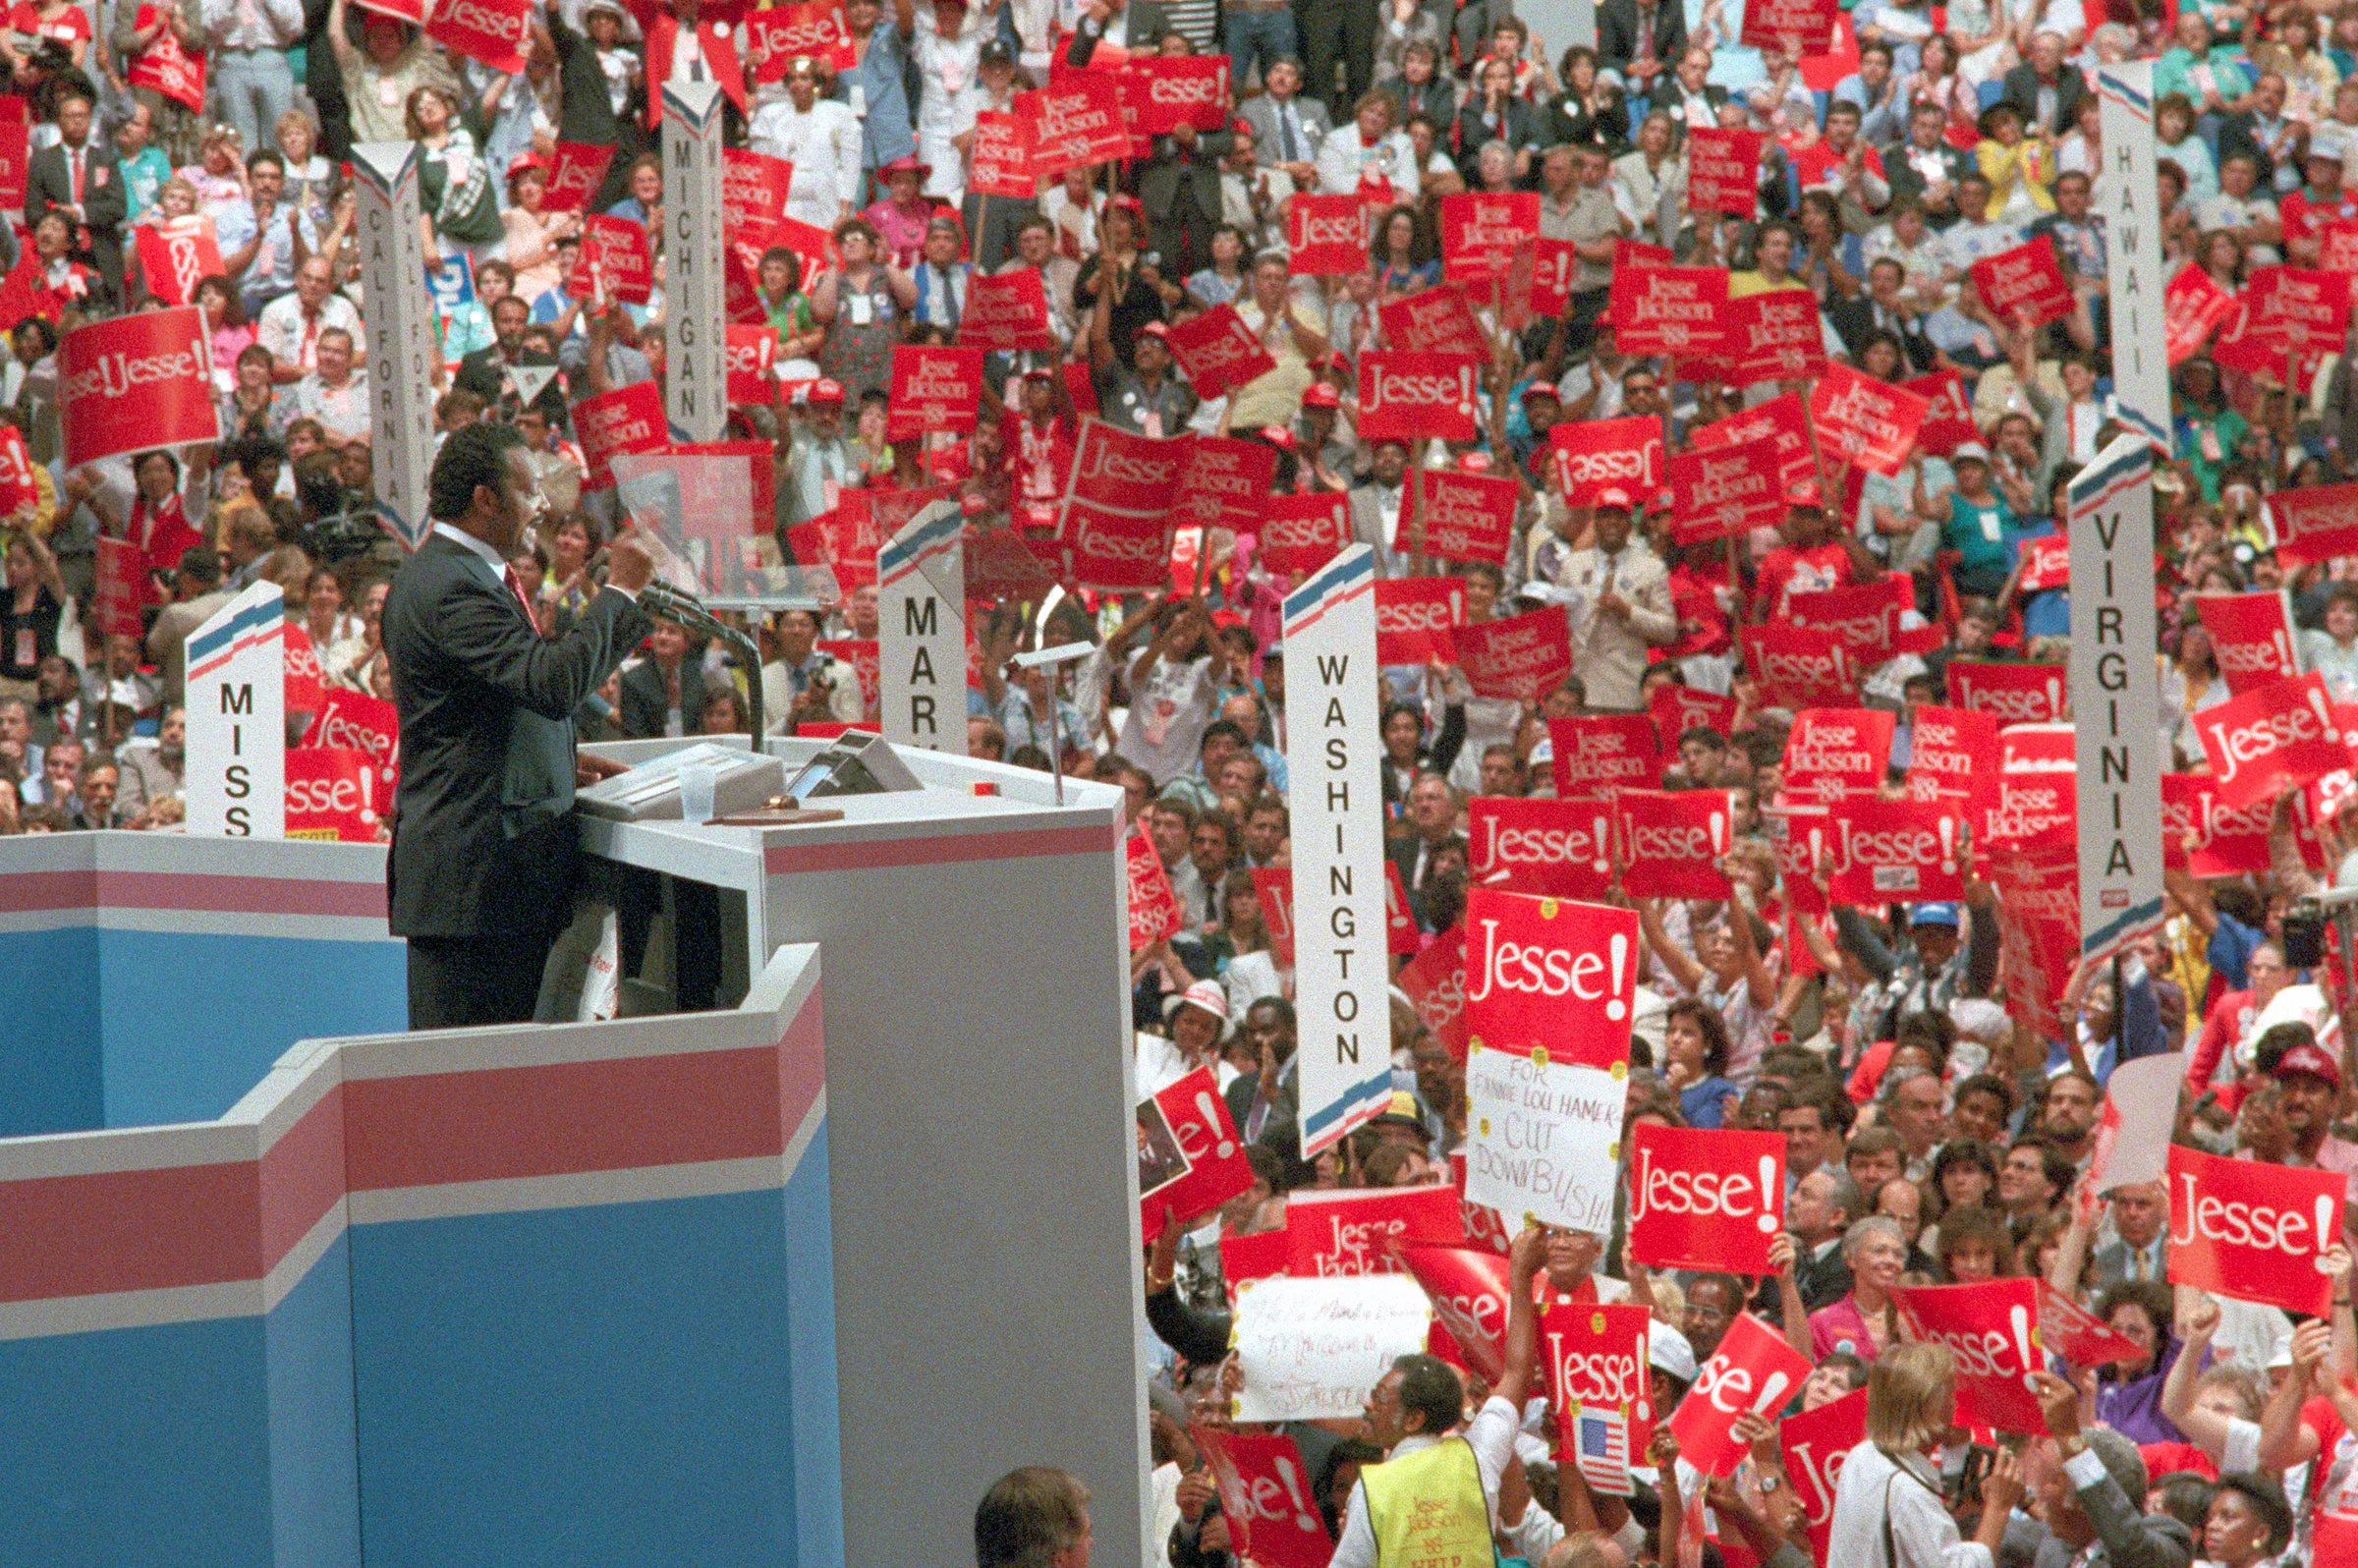 Jackson addresses the Democratic National Convention on July 19, 1988. (Bettmann Archive/Getty Images)